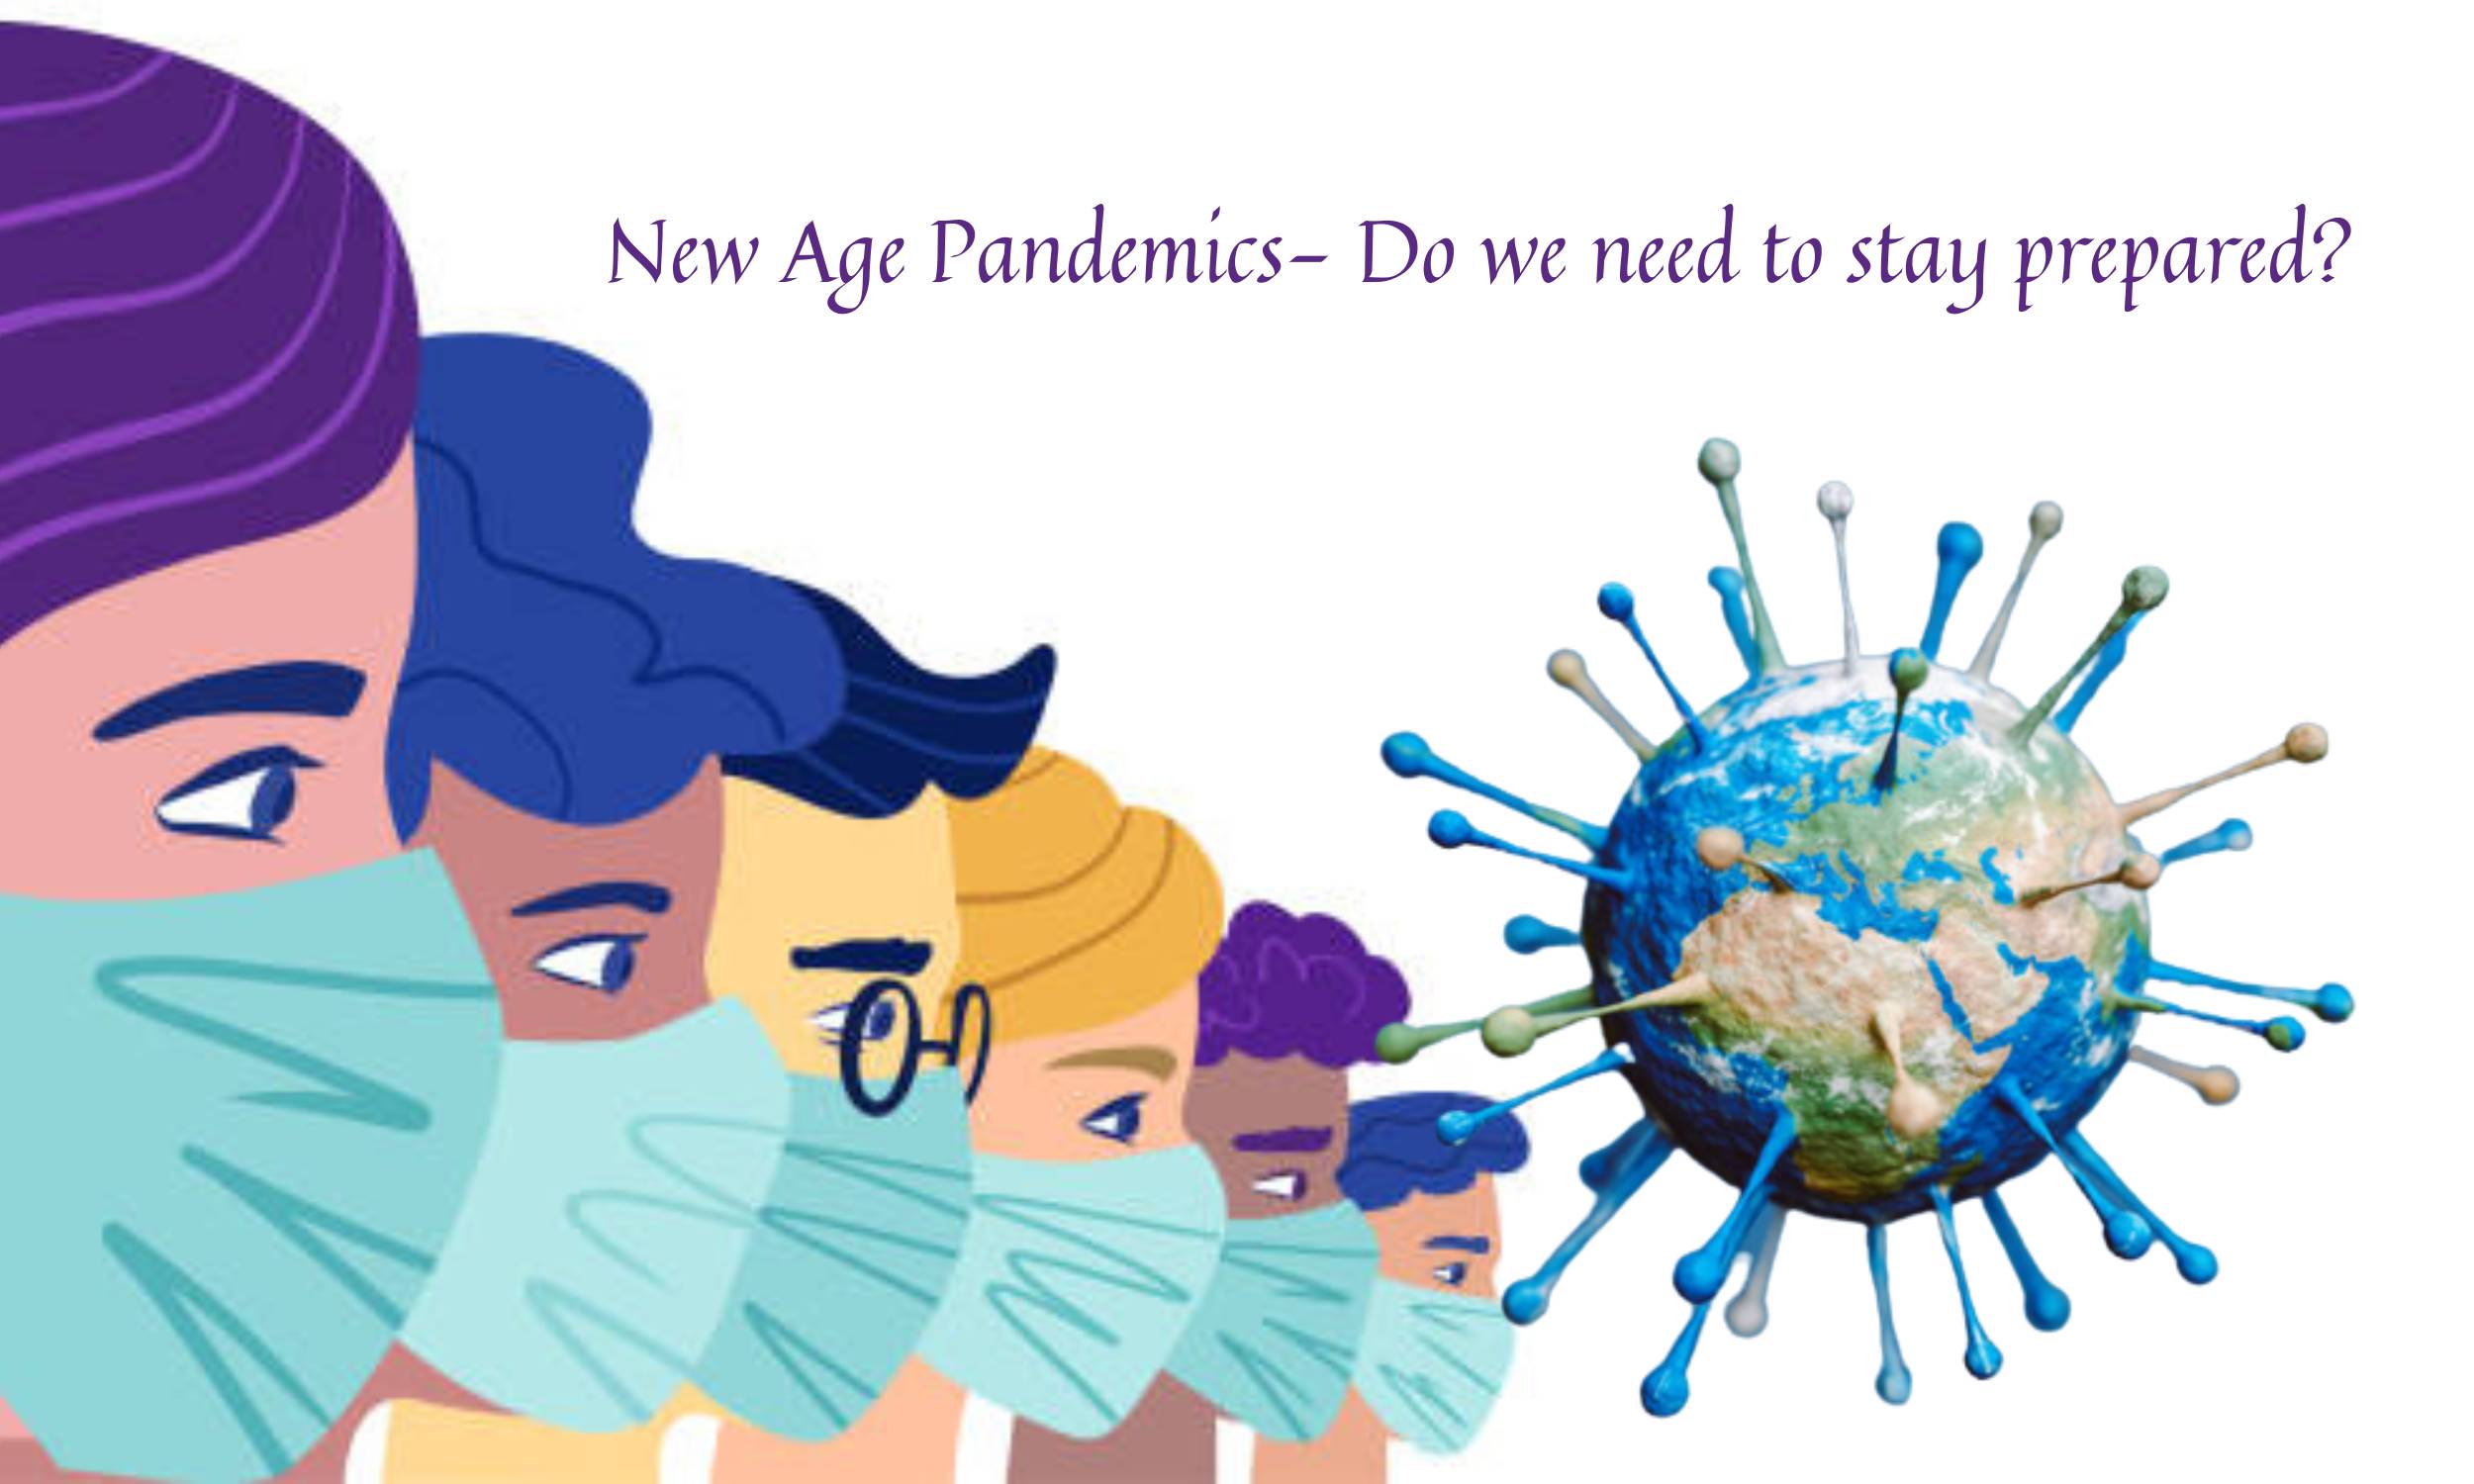 New Age Pandemics- a threat to mankind